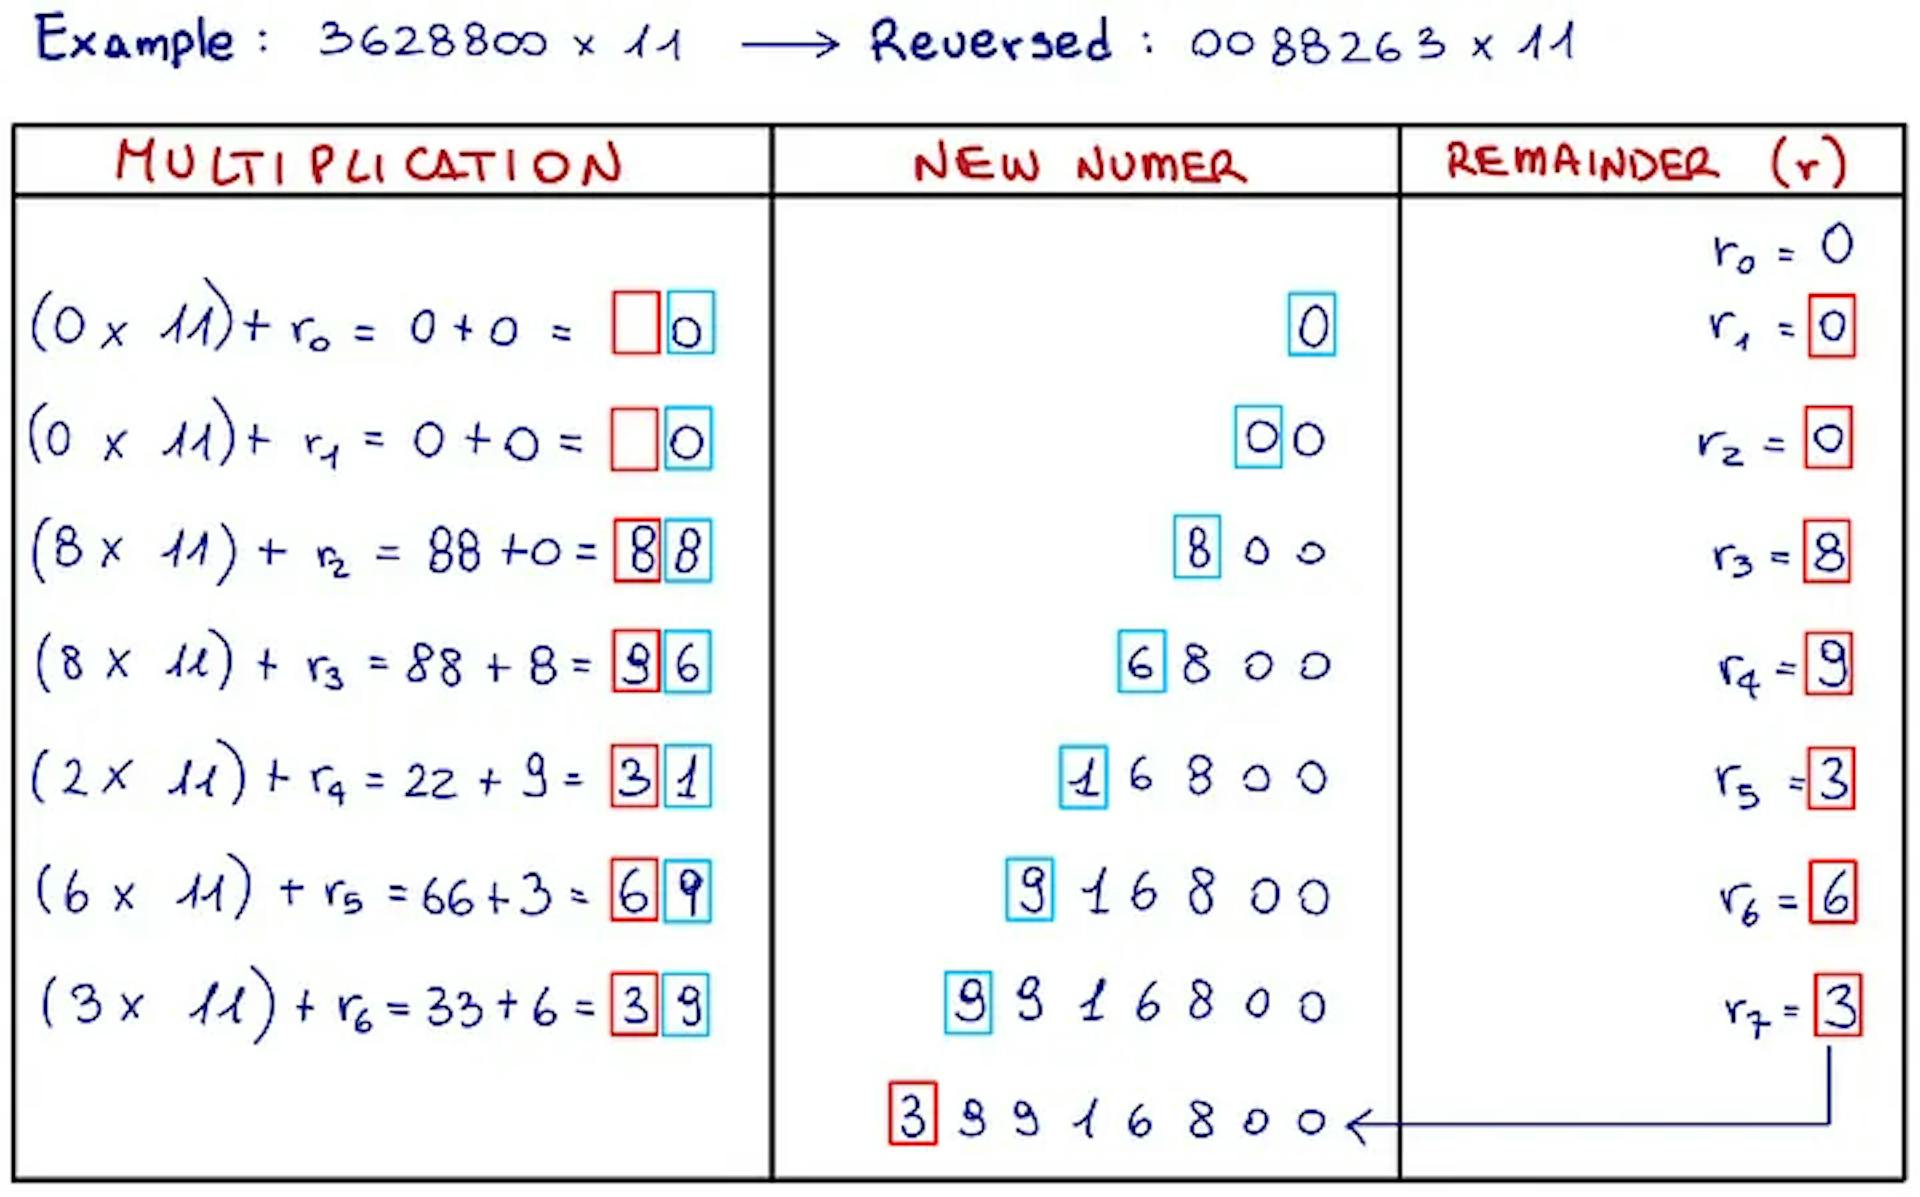 Multiplication process of two big numbers